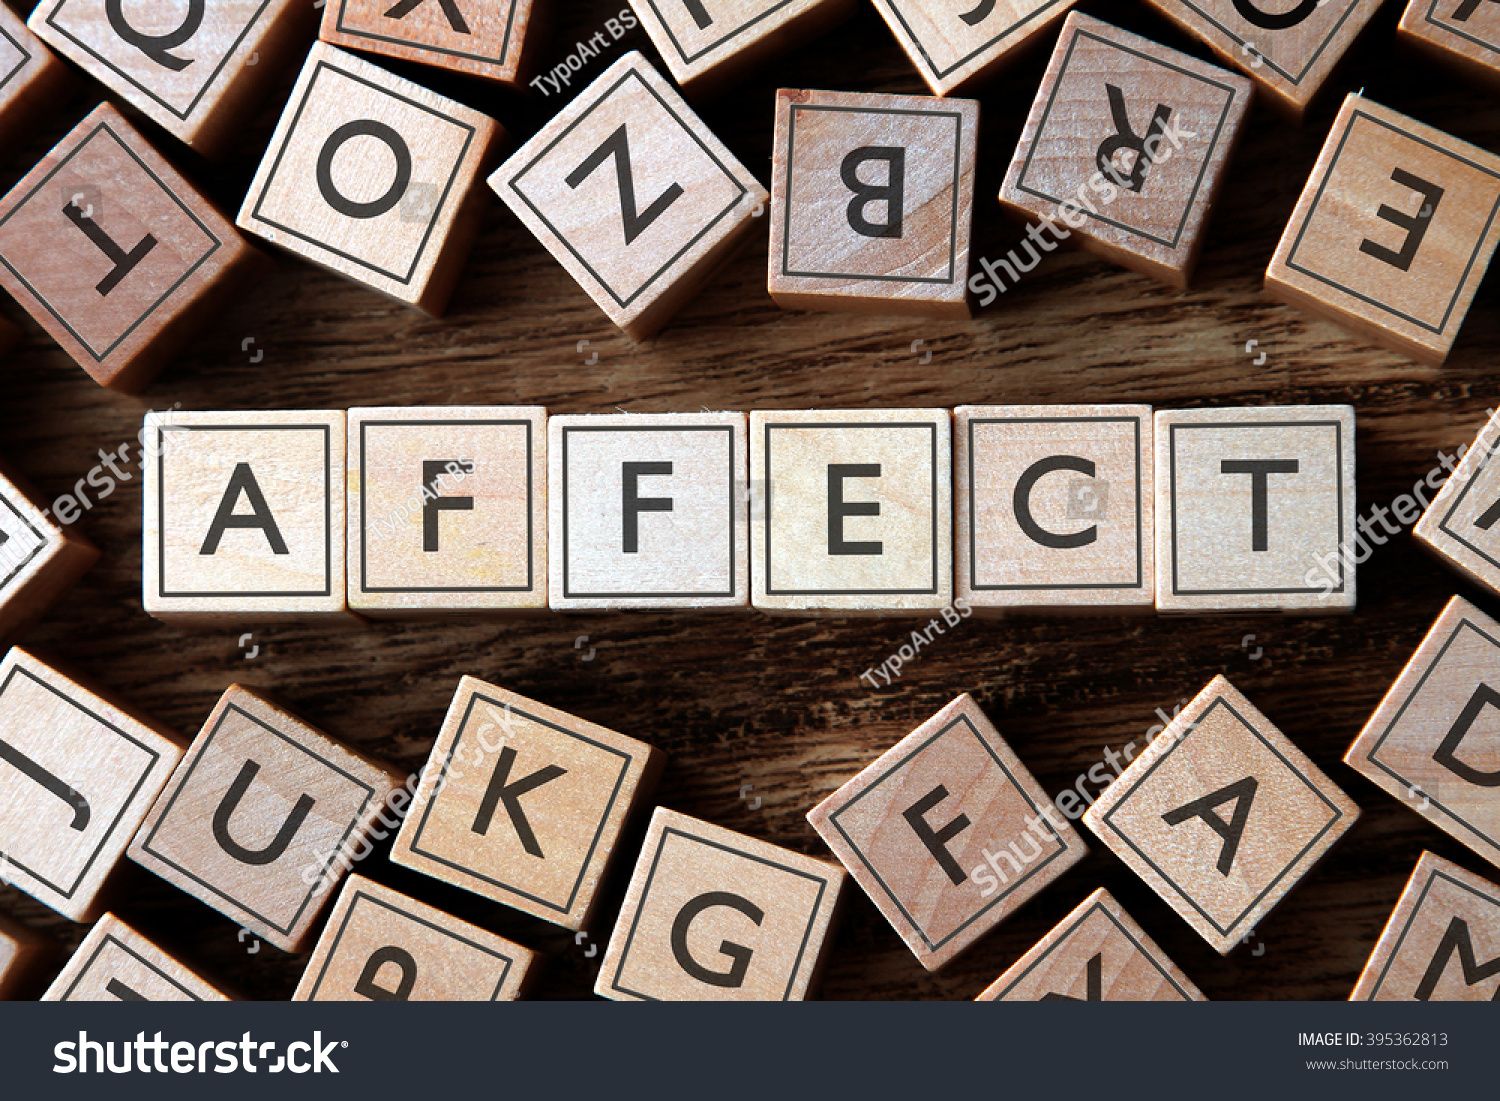 Word Affect On Building Blocks Concept Stock Photo 395362813 - Shutterstock